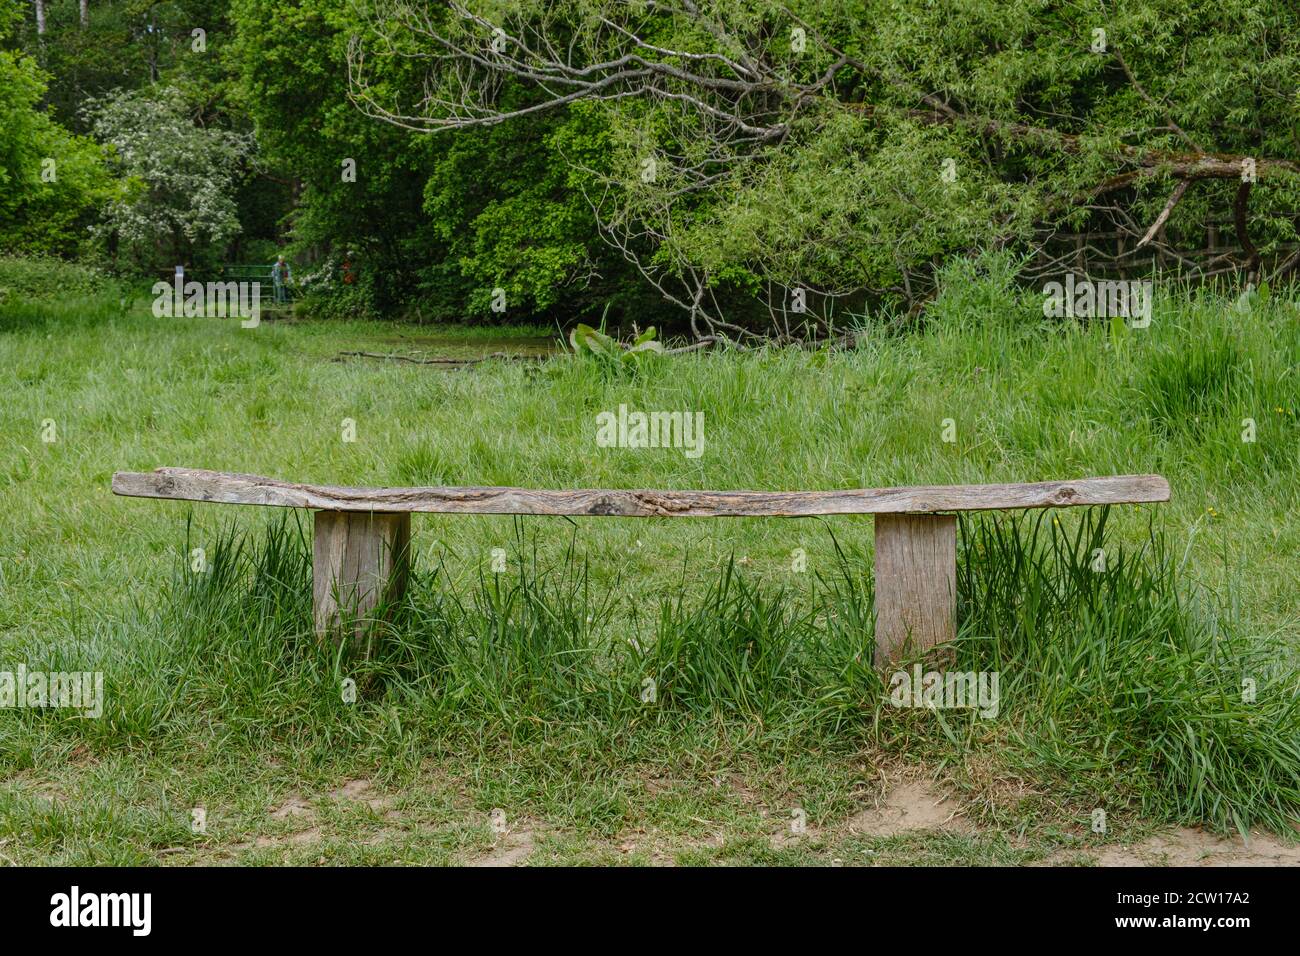 A rustic wooden plank bench on two posts in a grassy field with thick woods in background. Ruislip Woods Nature Preserve, Hillingdon, London. Stock Photo